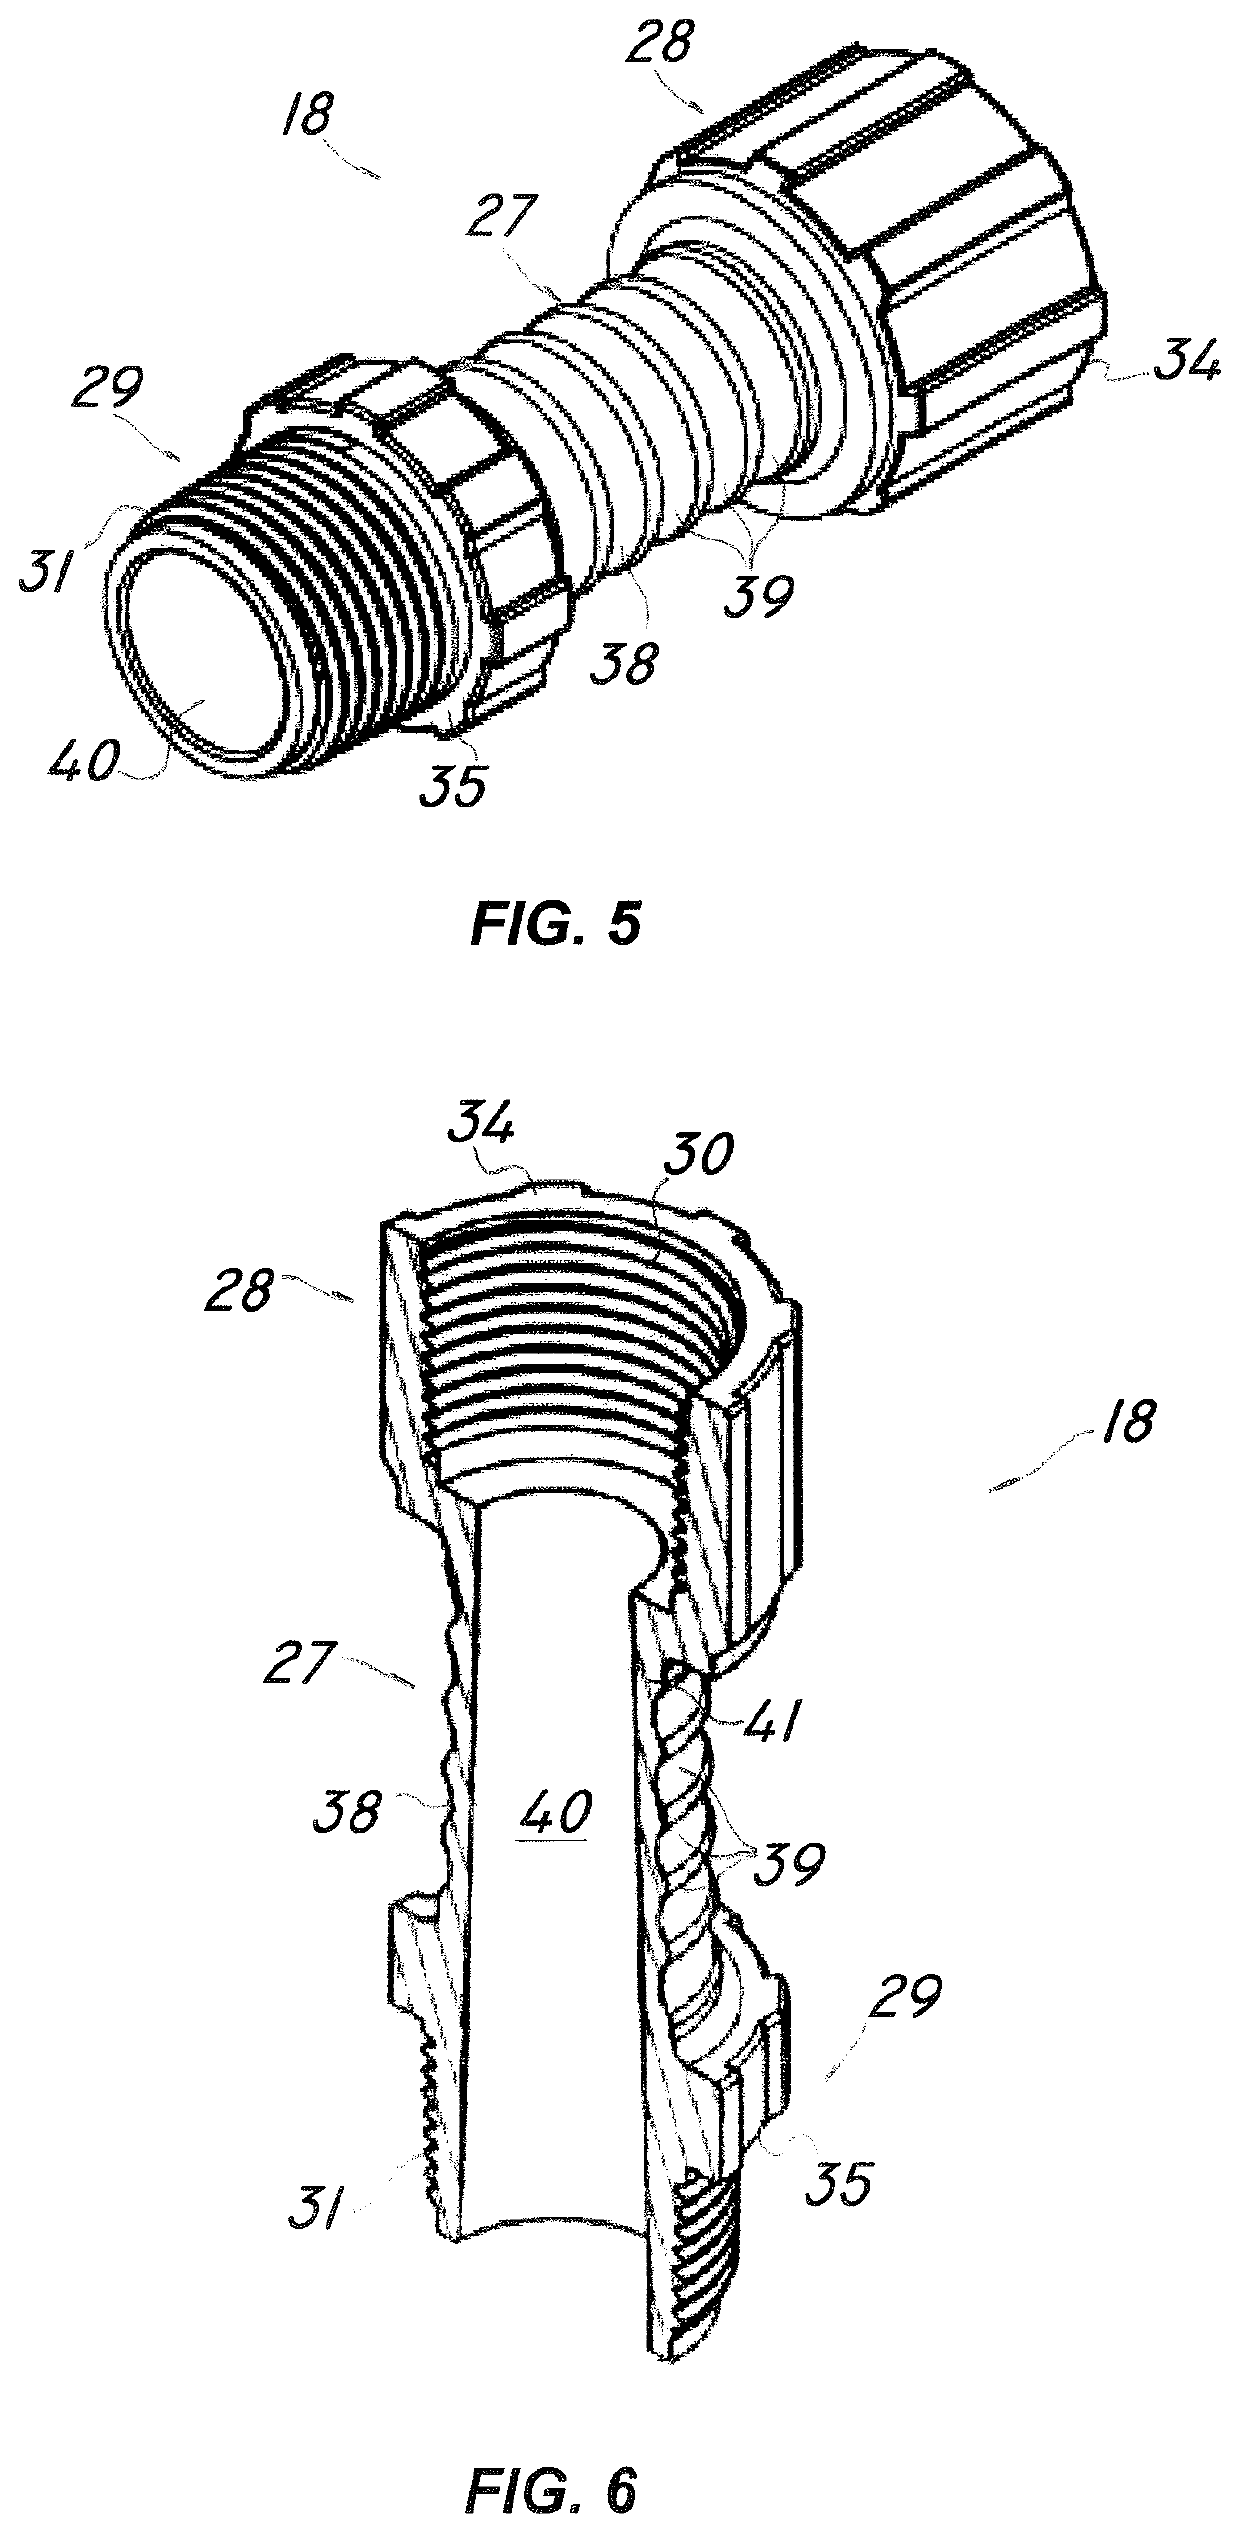 Diffuser assembly for diffusing a liquid in irrigation plants, and irrigation plant comprising a plurality of diffuser assemblies